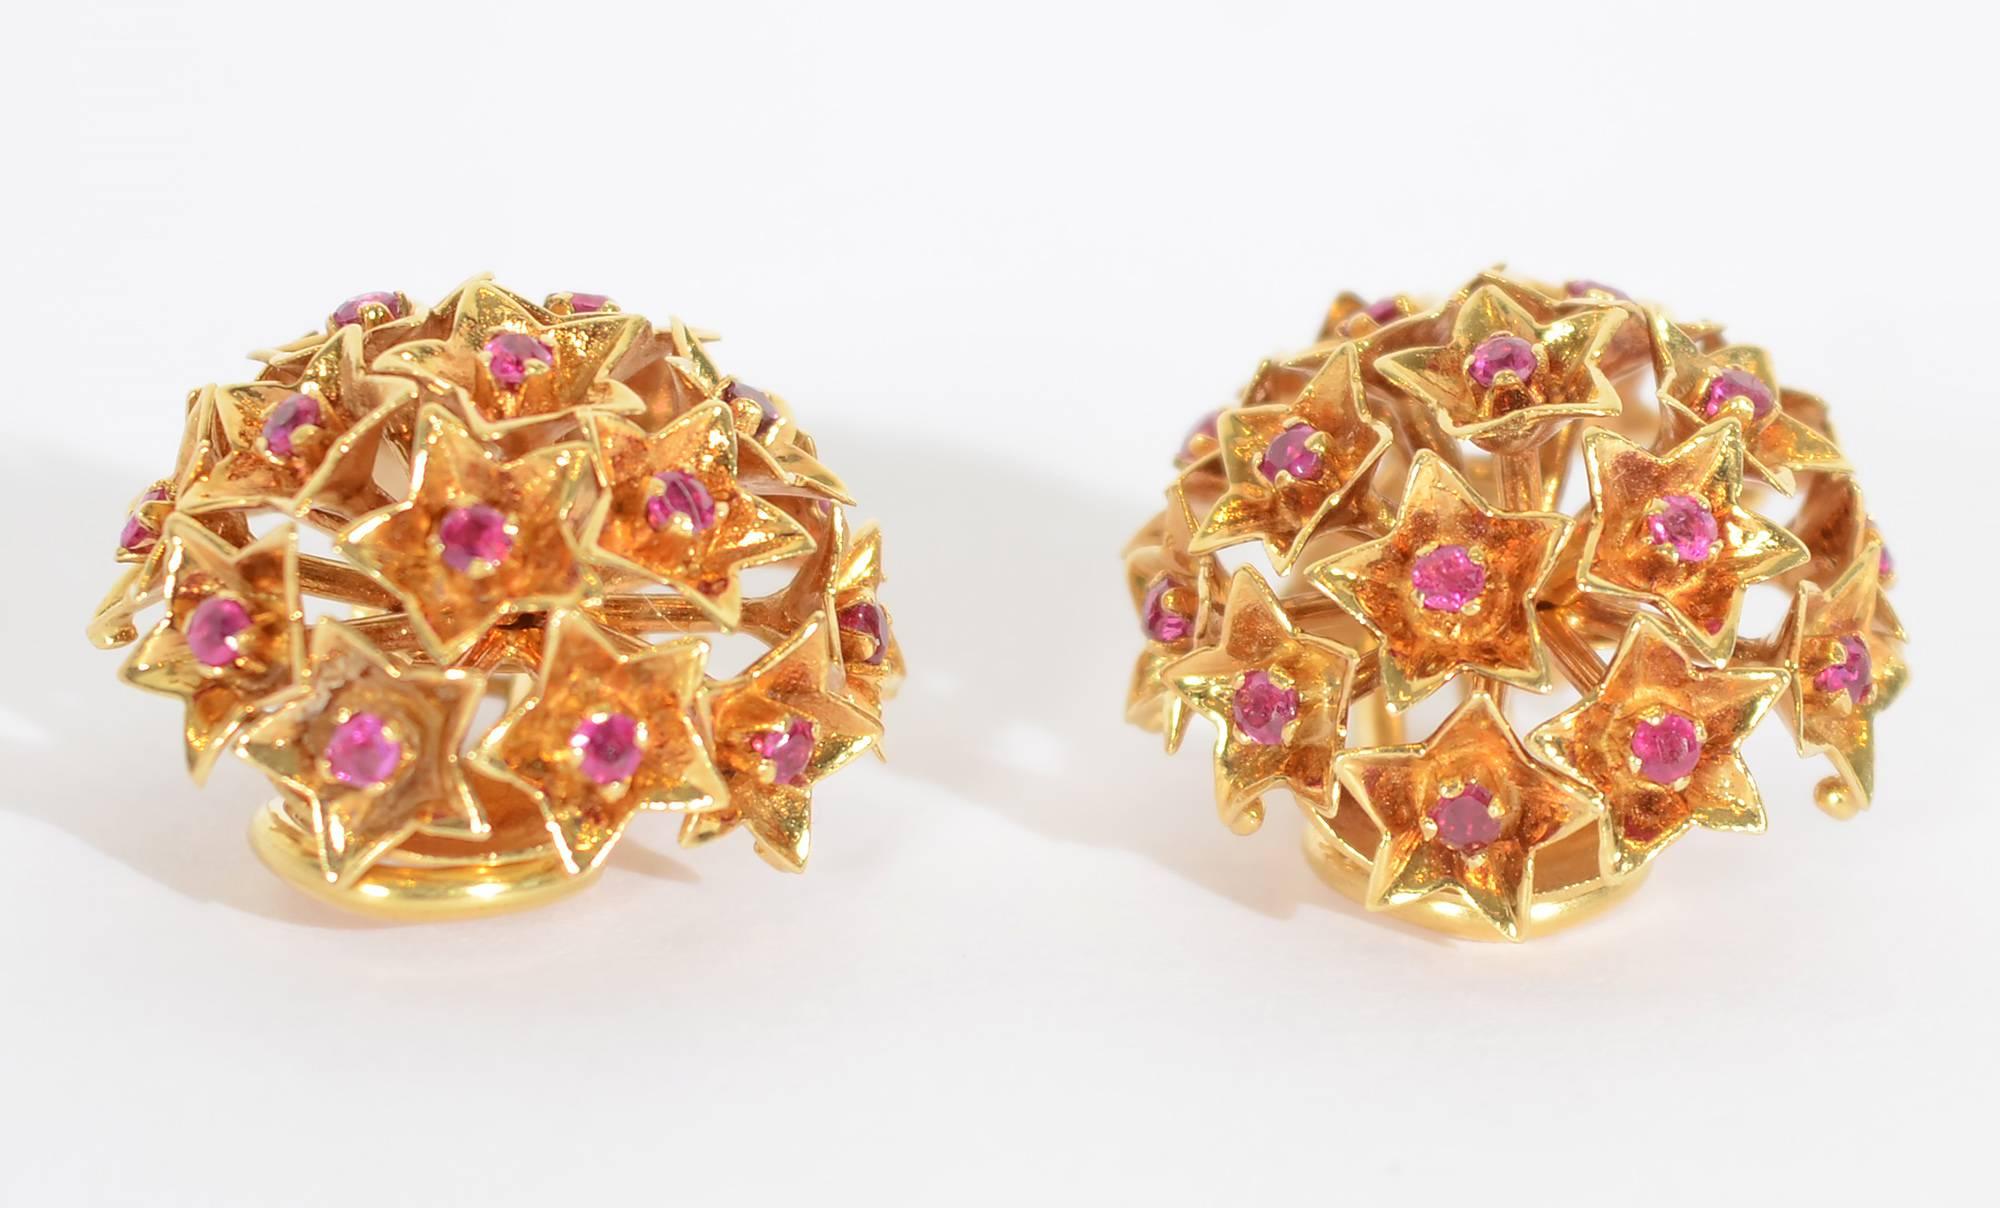 Dome shaped earrings by Tiffany and Co. in which rubies are set in five point stars. They measure 3/4